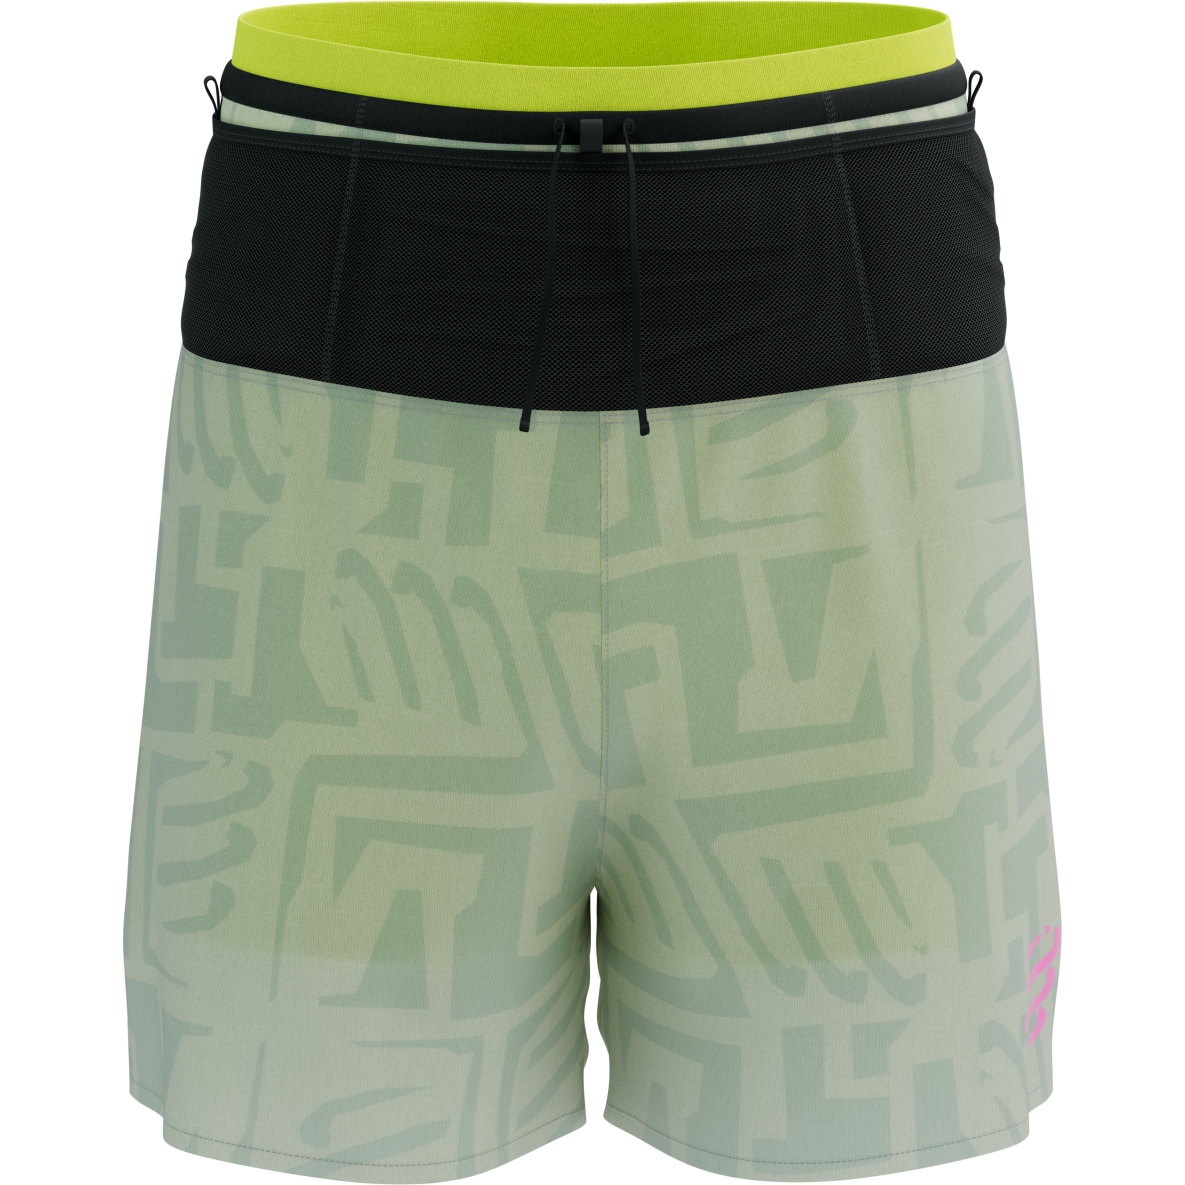 Picture of Compressport Trail Racing 2-in-1 Shorts Men - sugar swizzle/ice flow/safety yellow